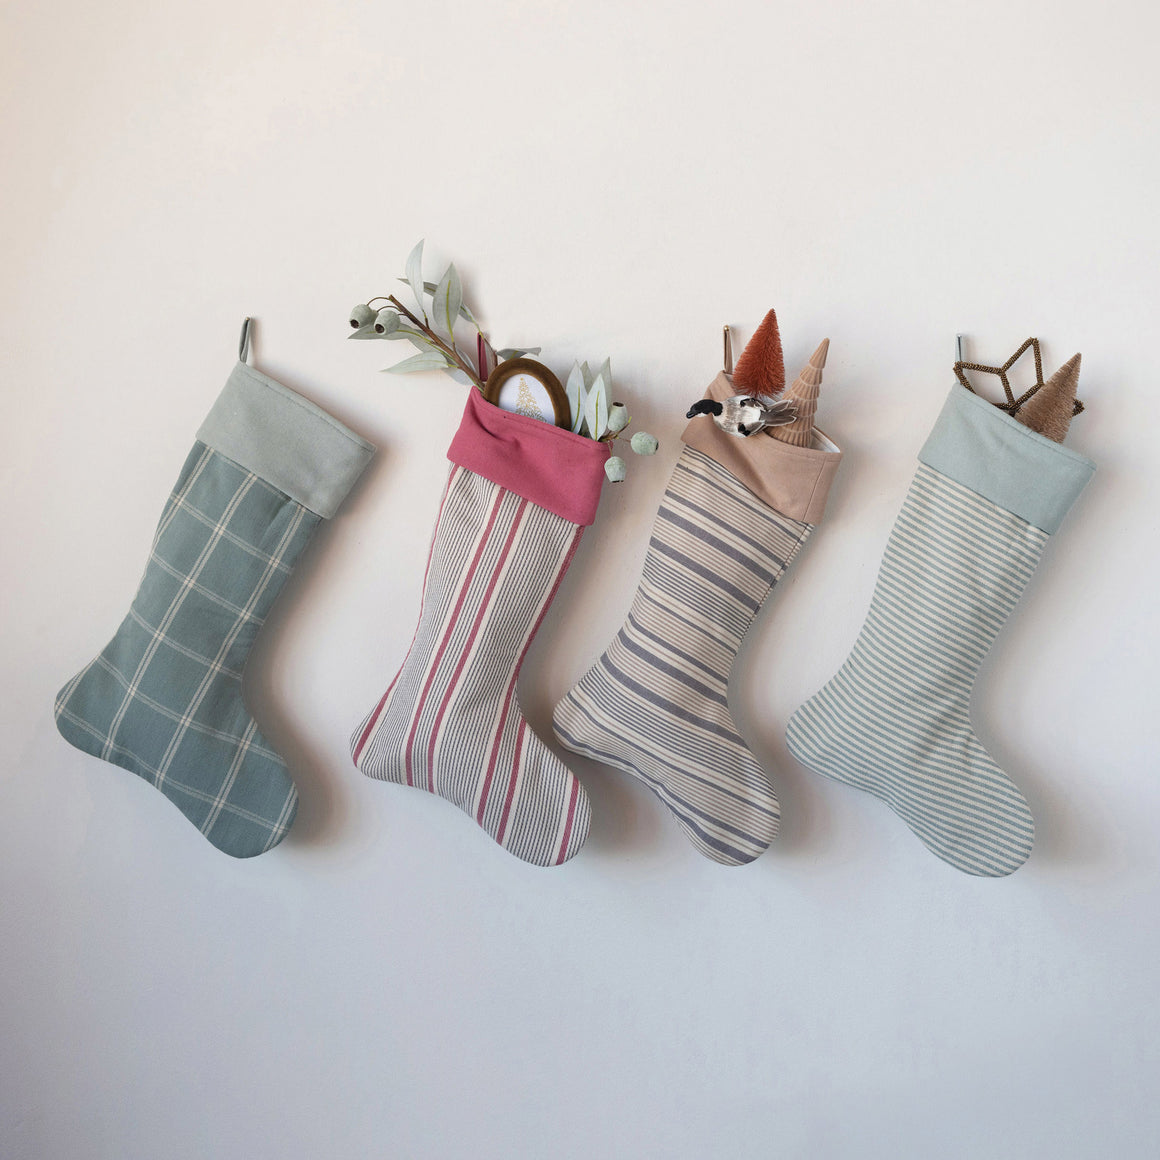 Woven Patterned Cotton Stocking